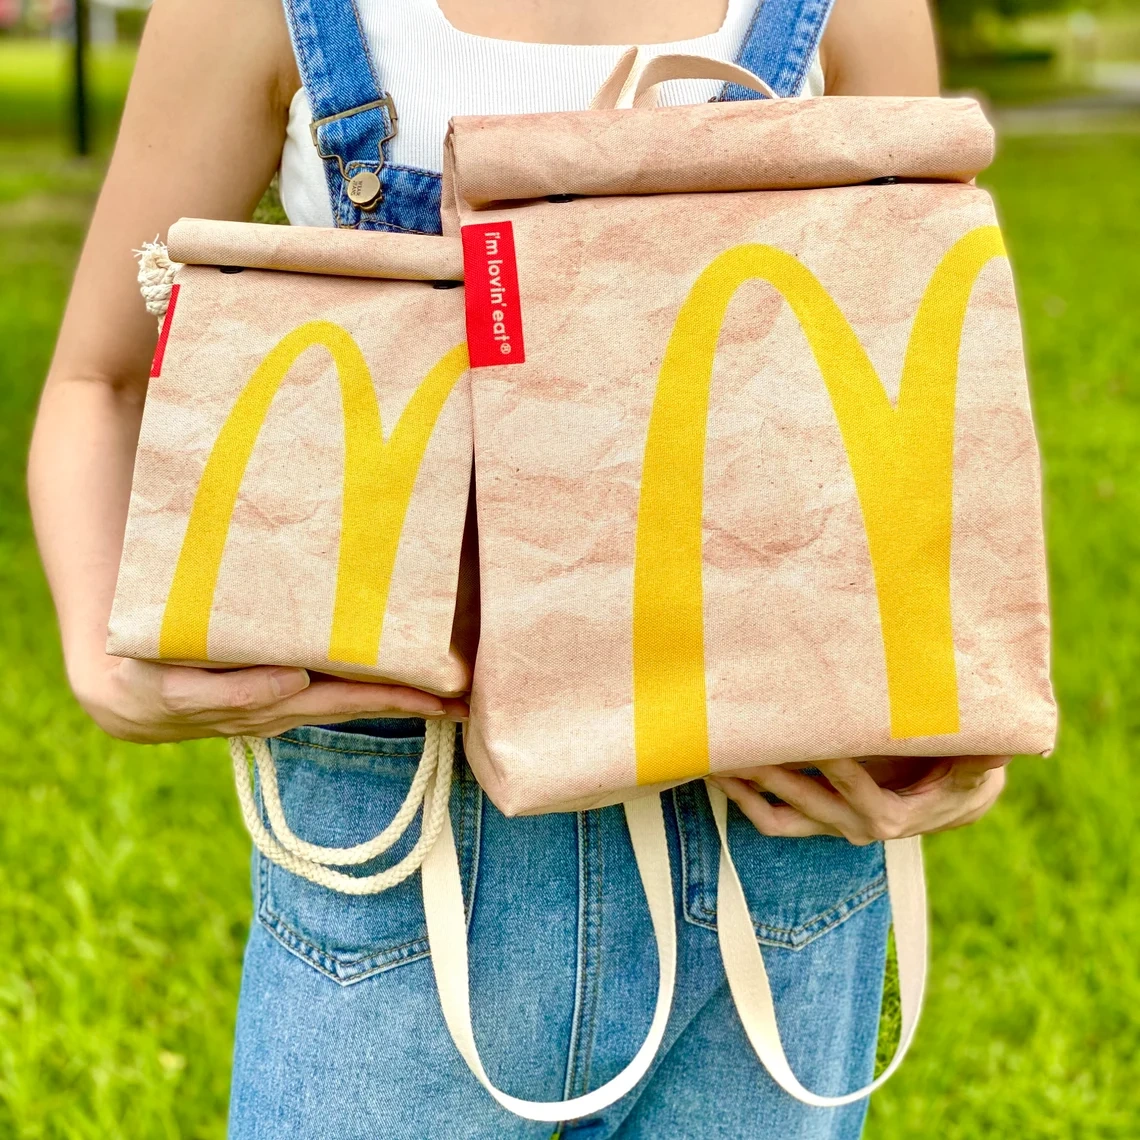 Mcdonalds Backpack - Recycled Polyester - Quirky Design